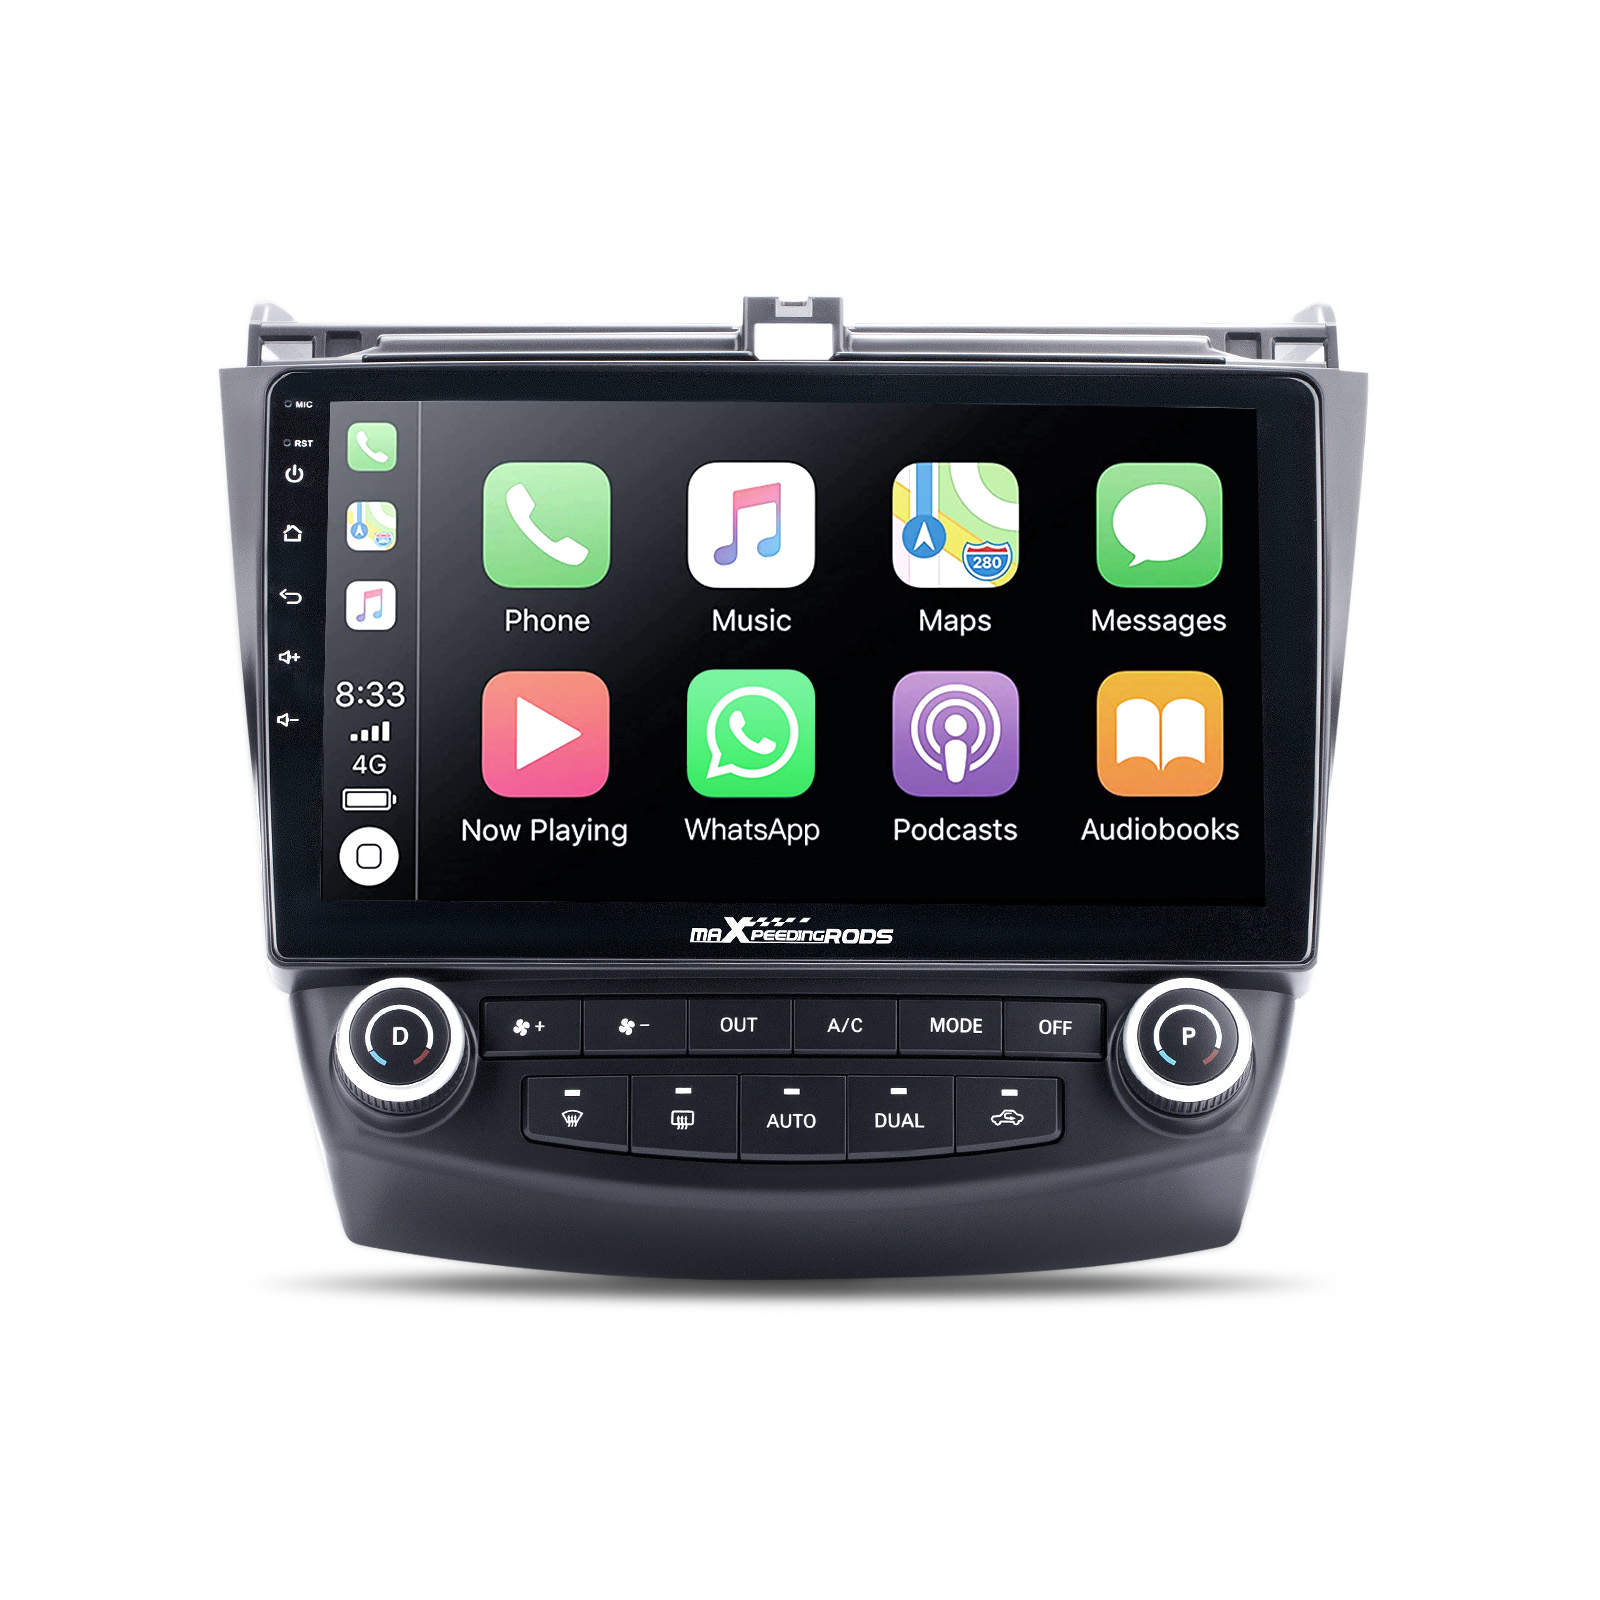 Bs Car Stereoandroid 10.0 1 Din Car Radio With Gps, 10-inch